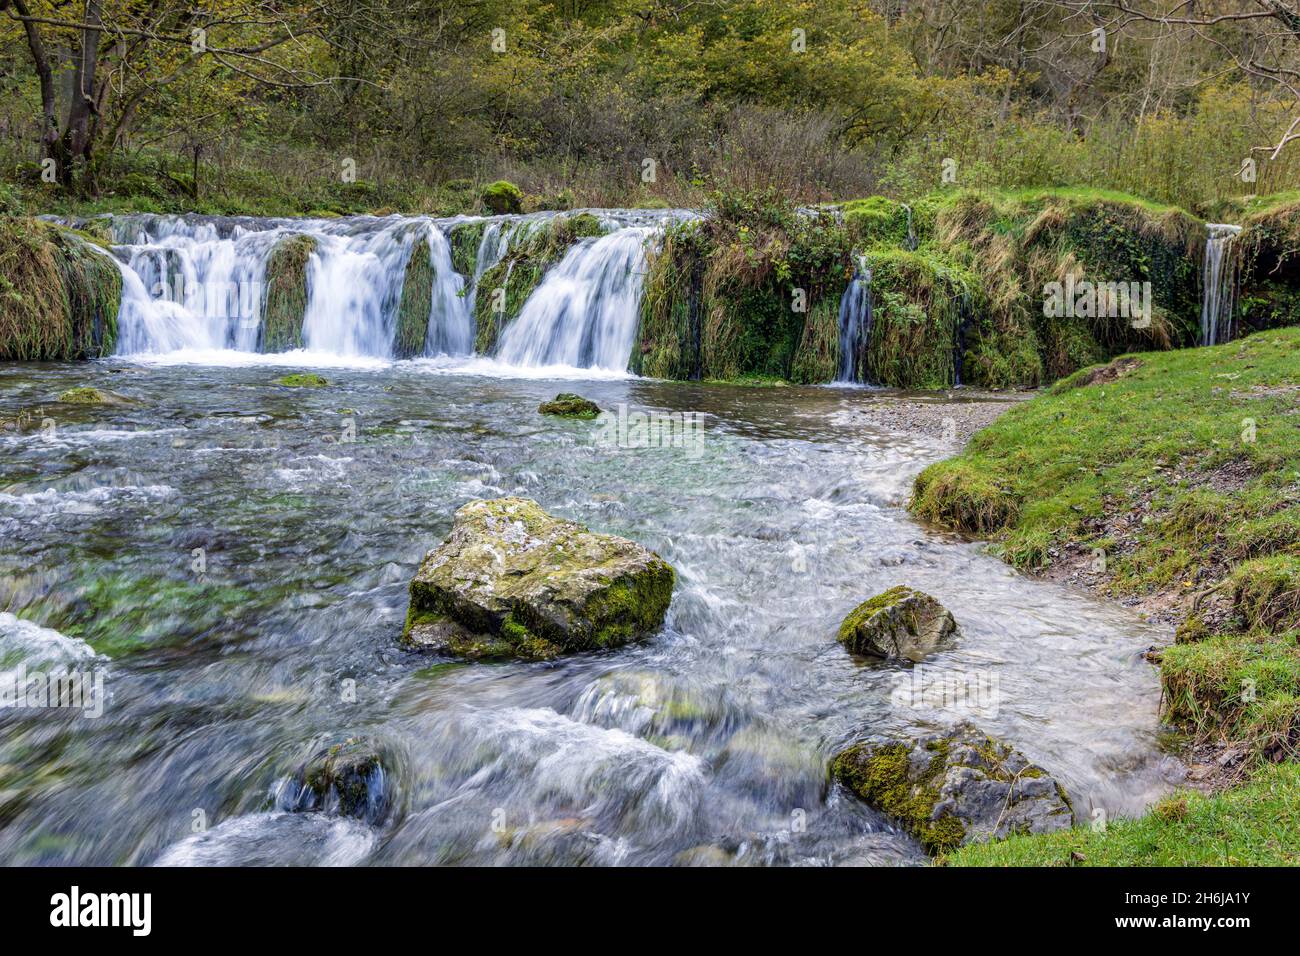 Tufa Dam or weir is a picturesque waterfall over limestone rocks, River Lathkill, Lathkill Dale, Peak District National Park, Derbyshire, England. Stock Photo